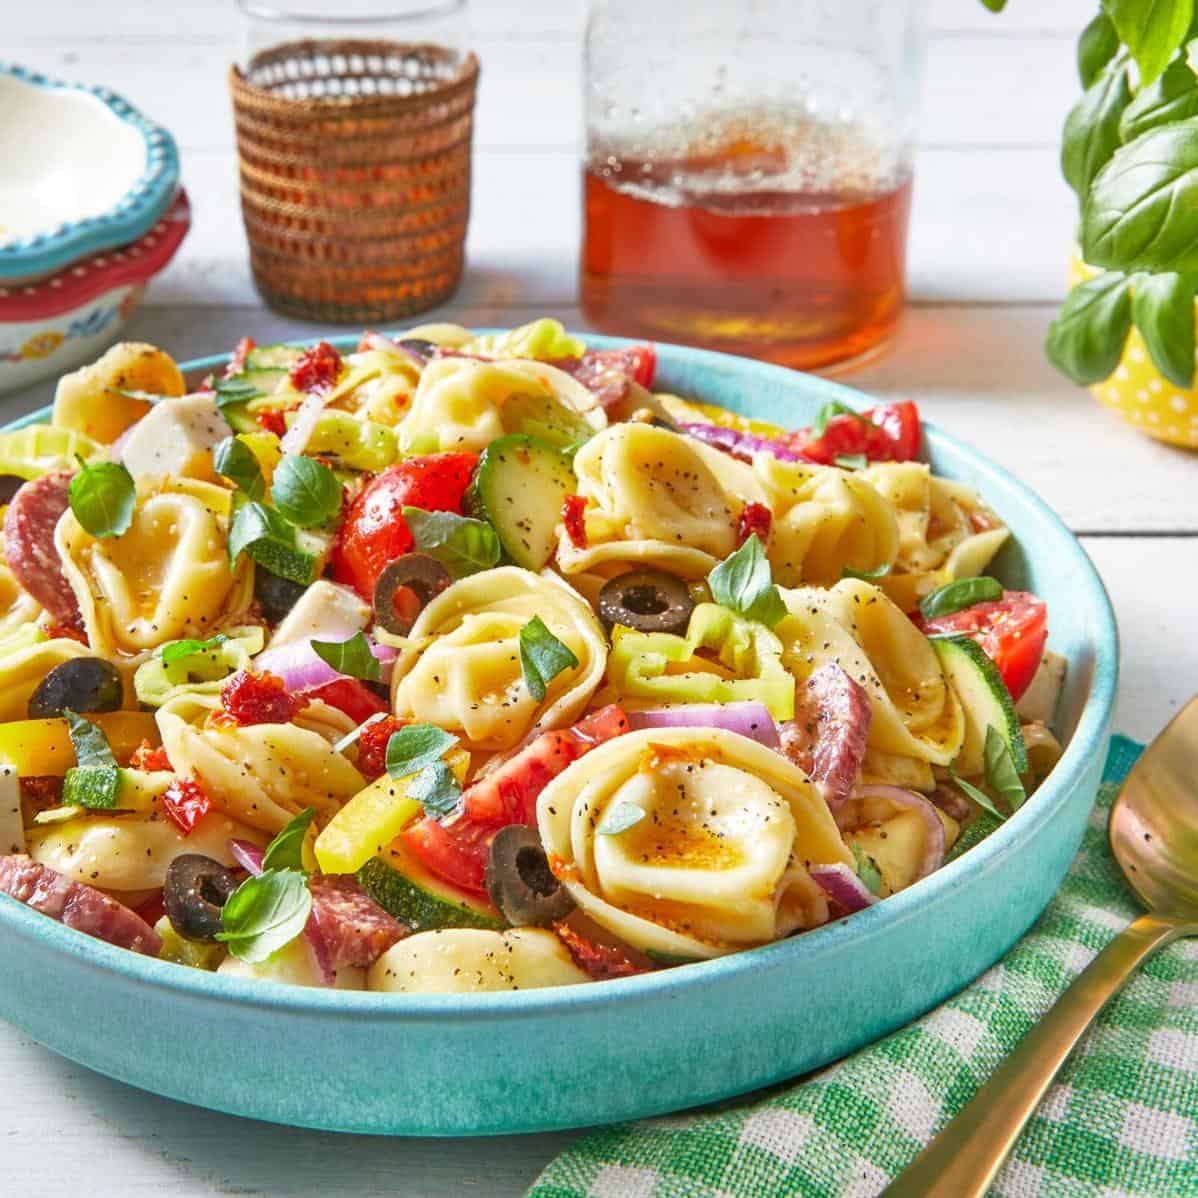  Colorful tortellini salad, made with fresh veggies and creamy dressing.